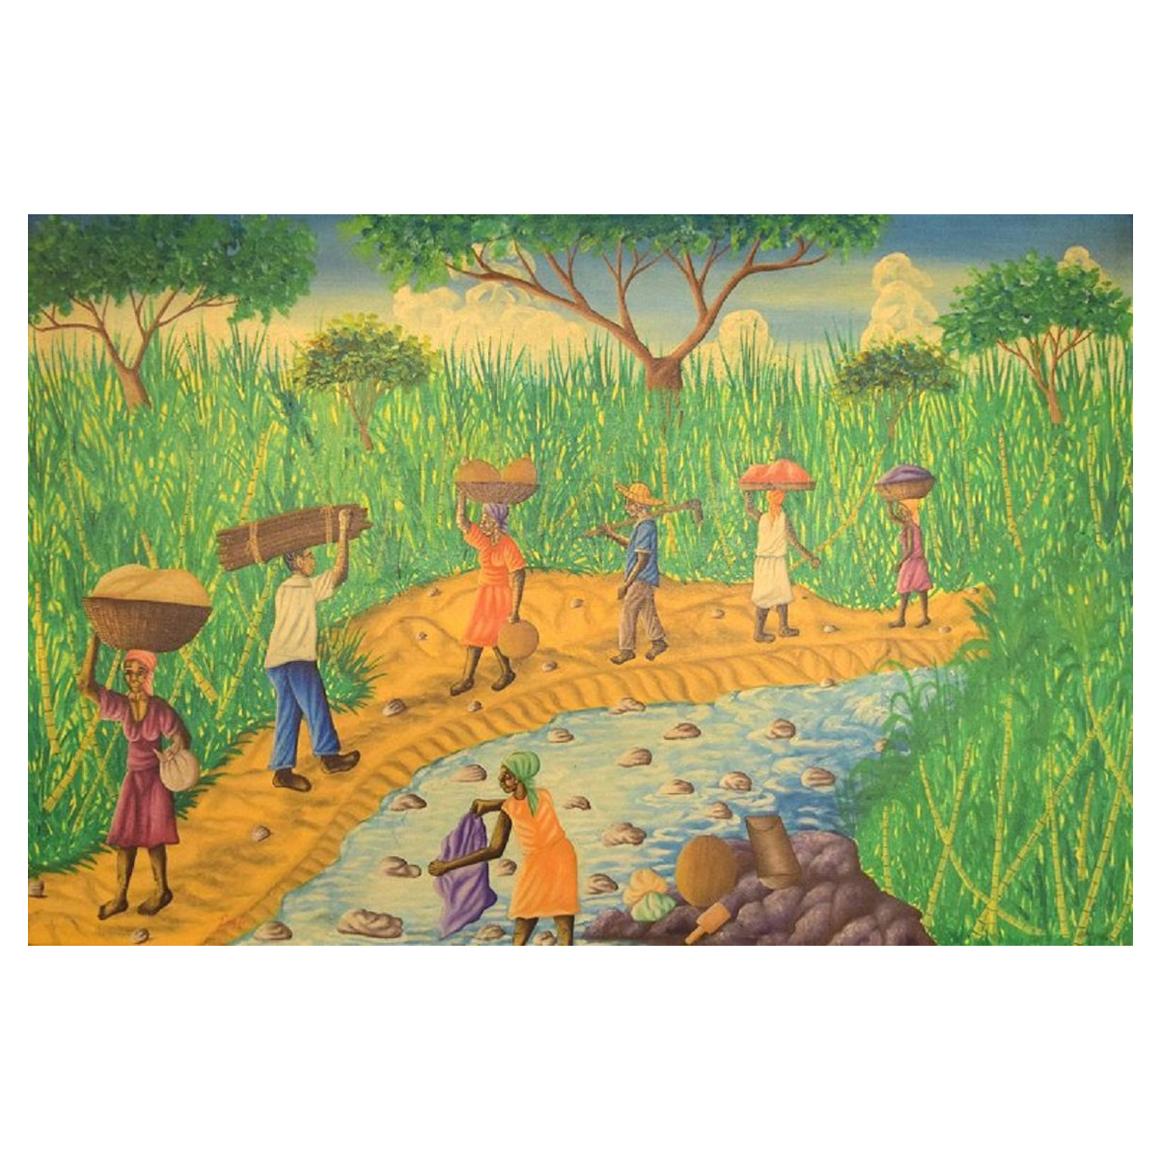 Emile, Haitian Artist, Naivist School, Oil on Canvas, 1970s, Local Workers